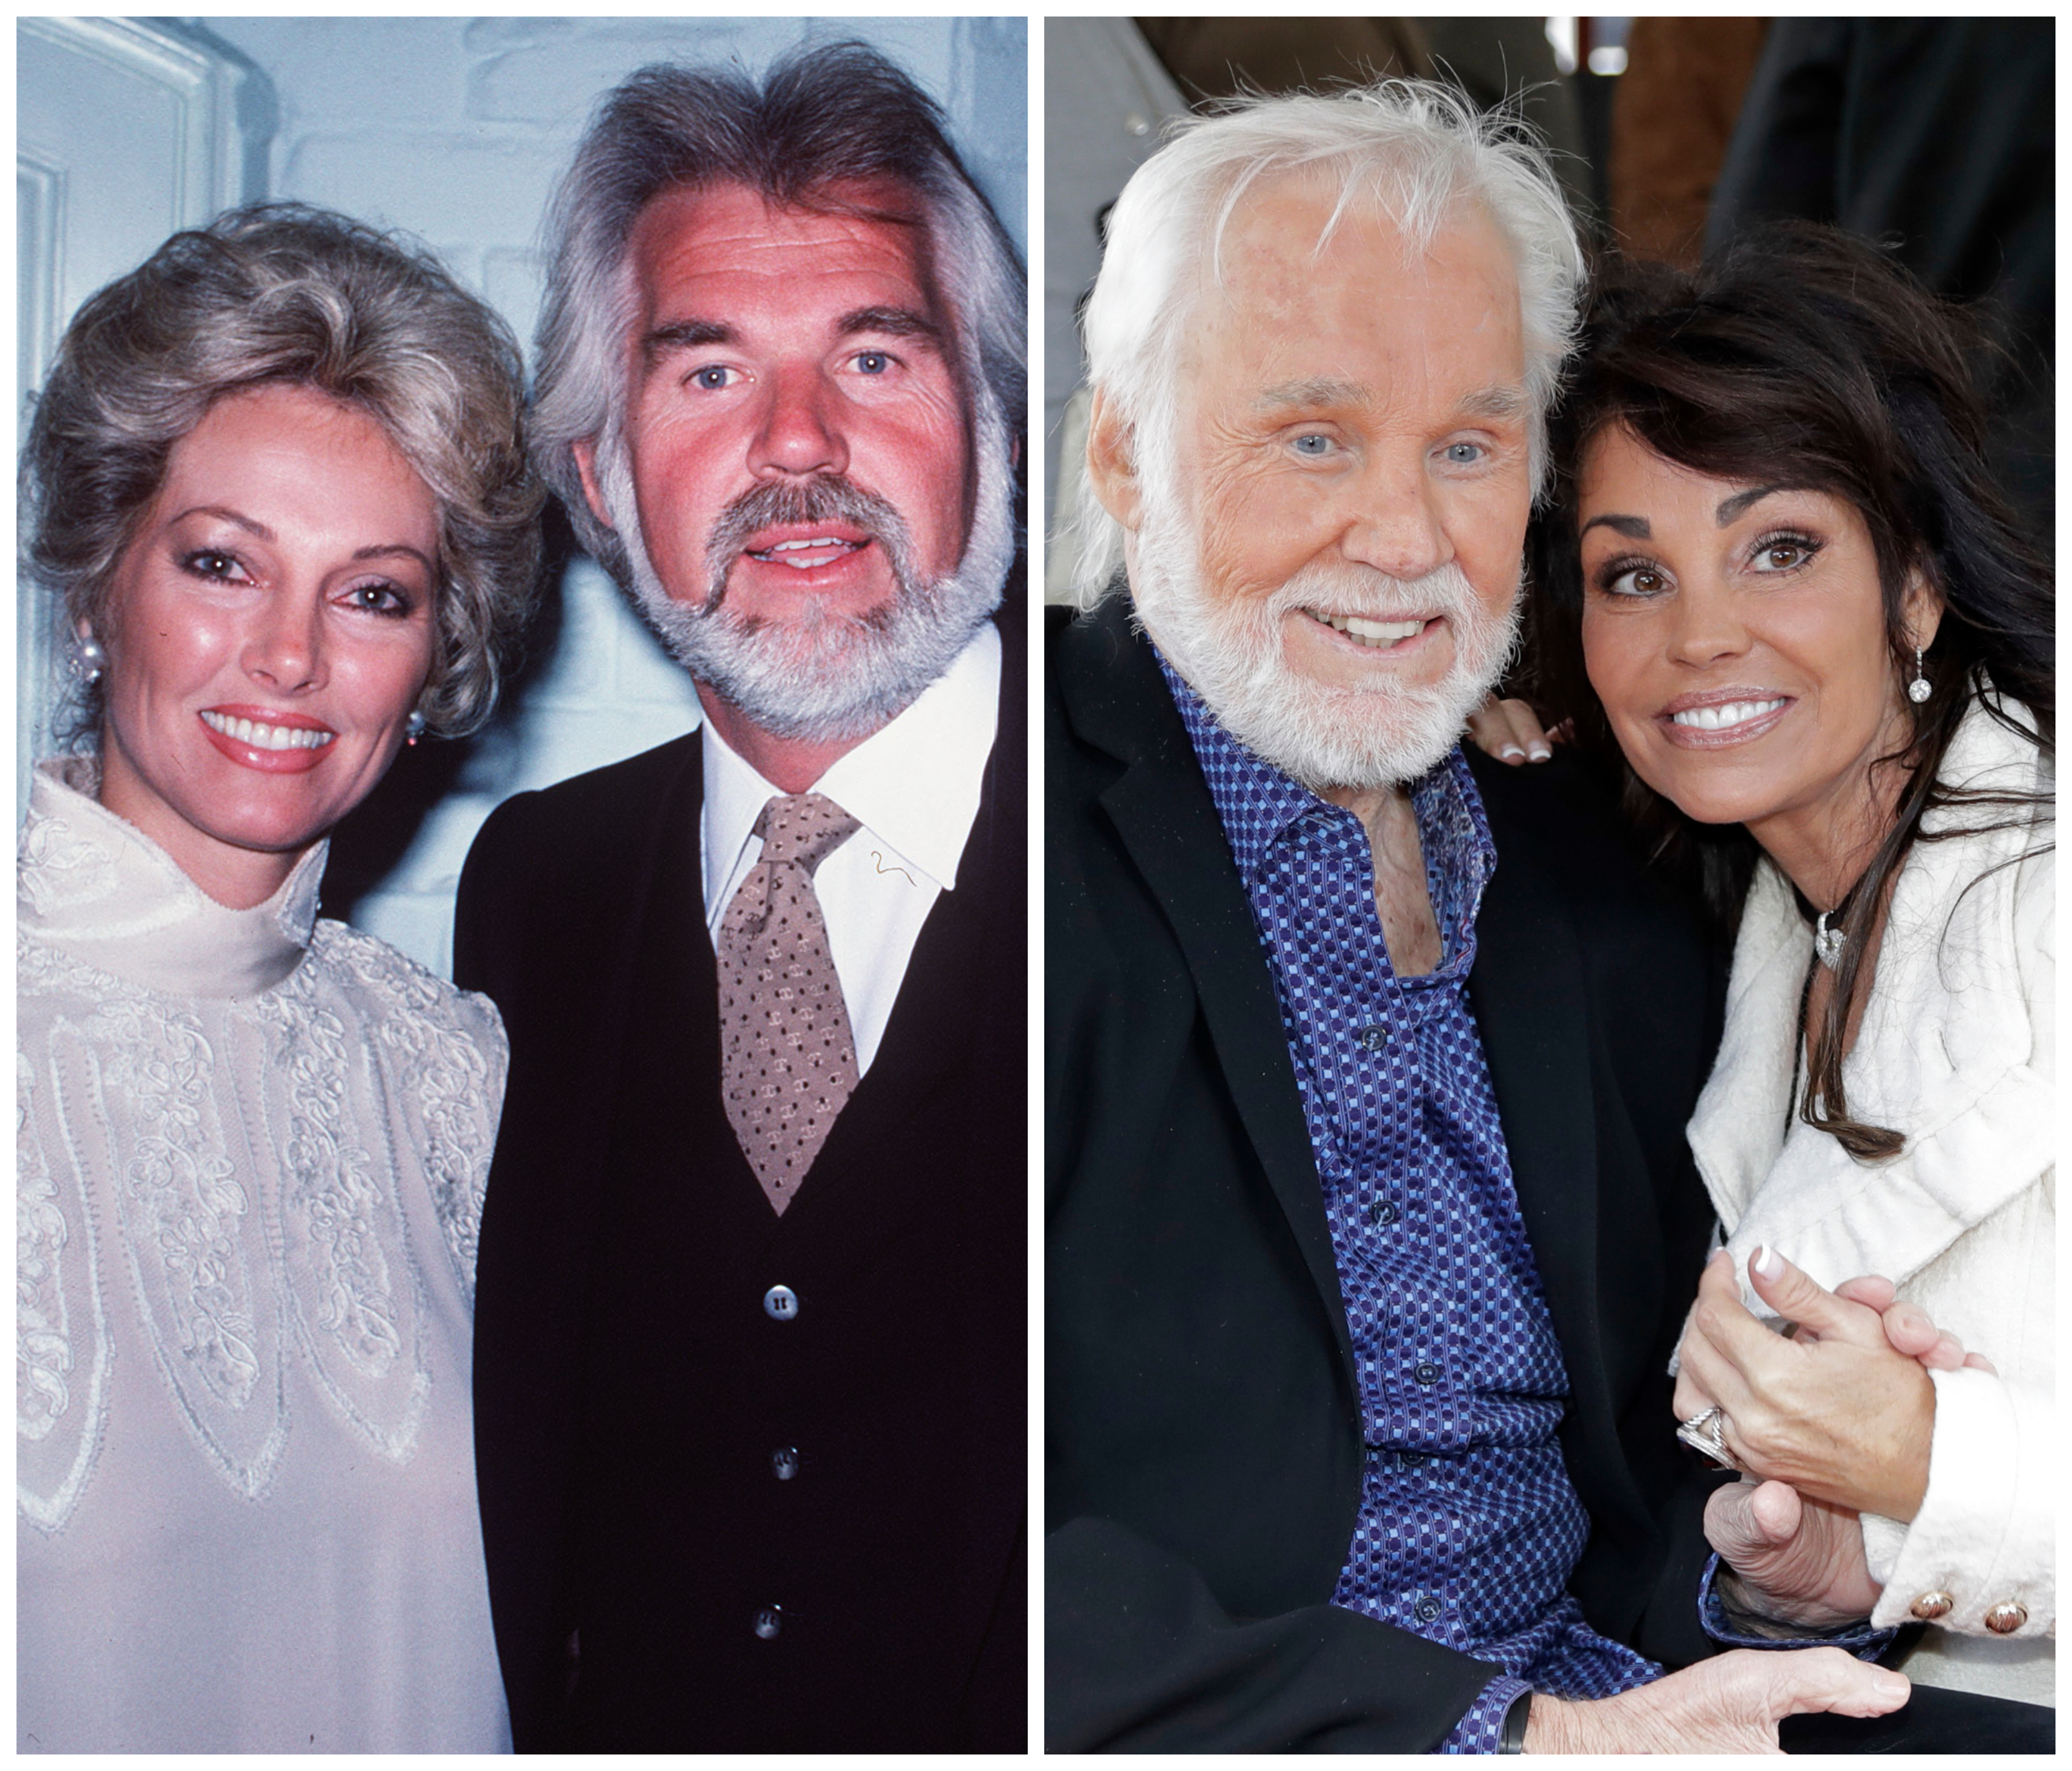 Kenny Rogers 5 Wives Wanda Miller, Marianne Gordon and More photo